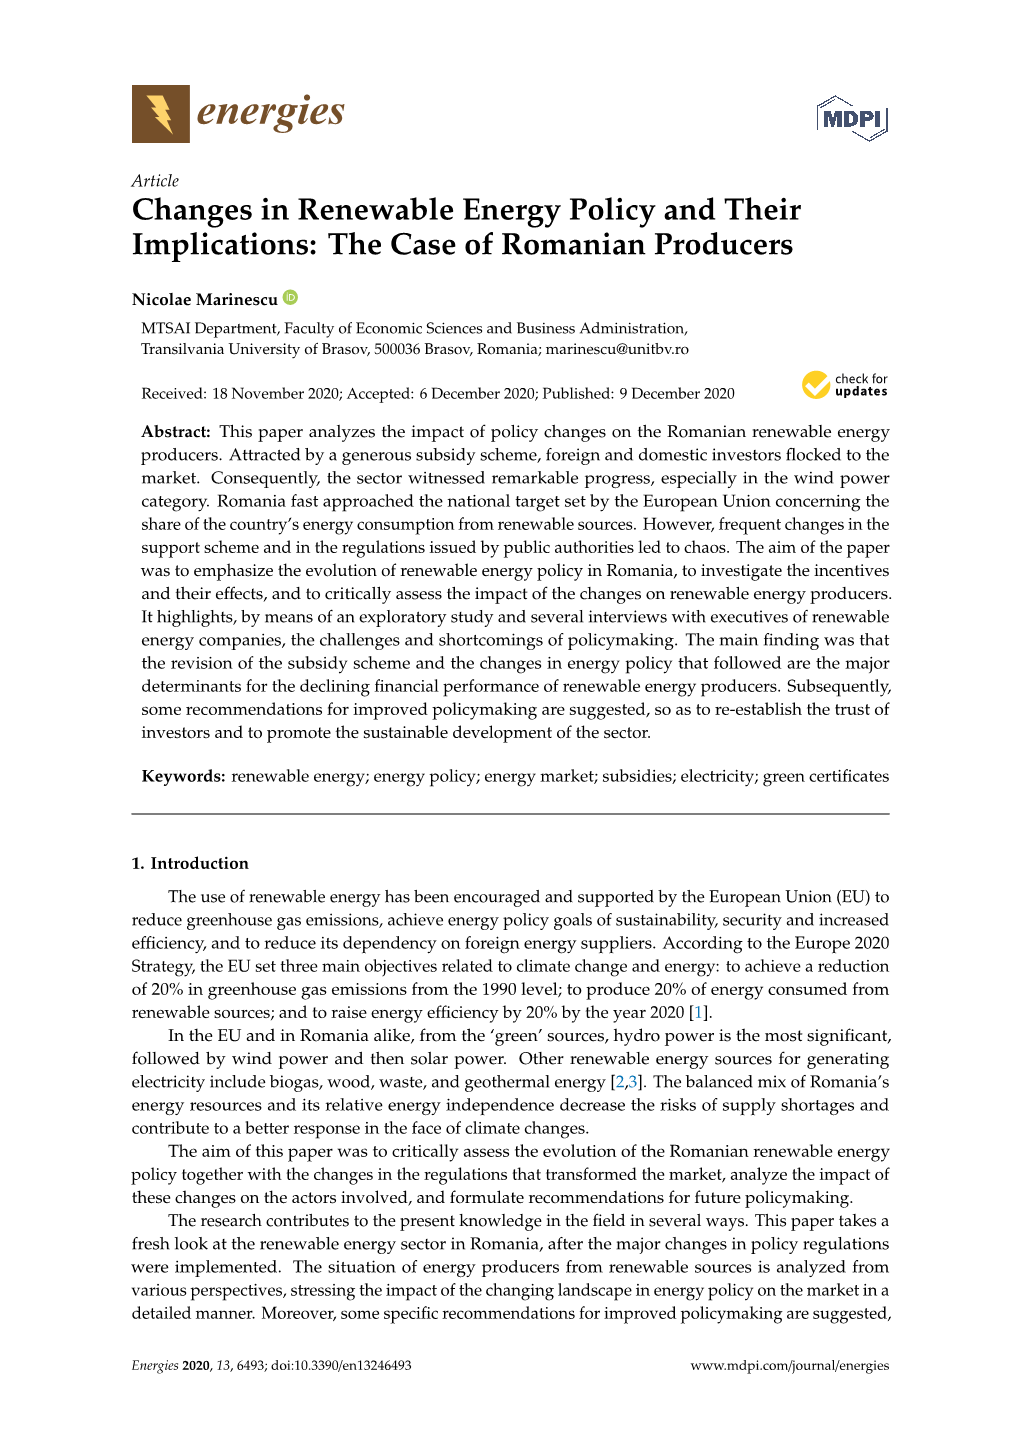 Changes in Renewable Energy Policy and Their Implications: the Case of Romanian Producers